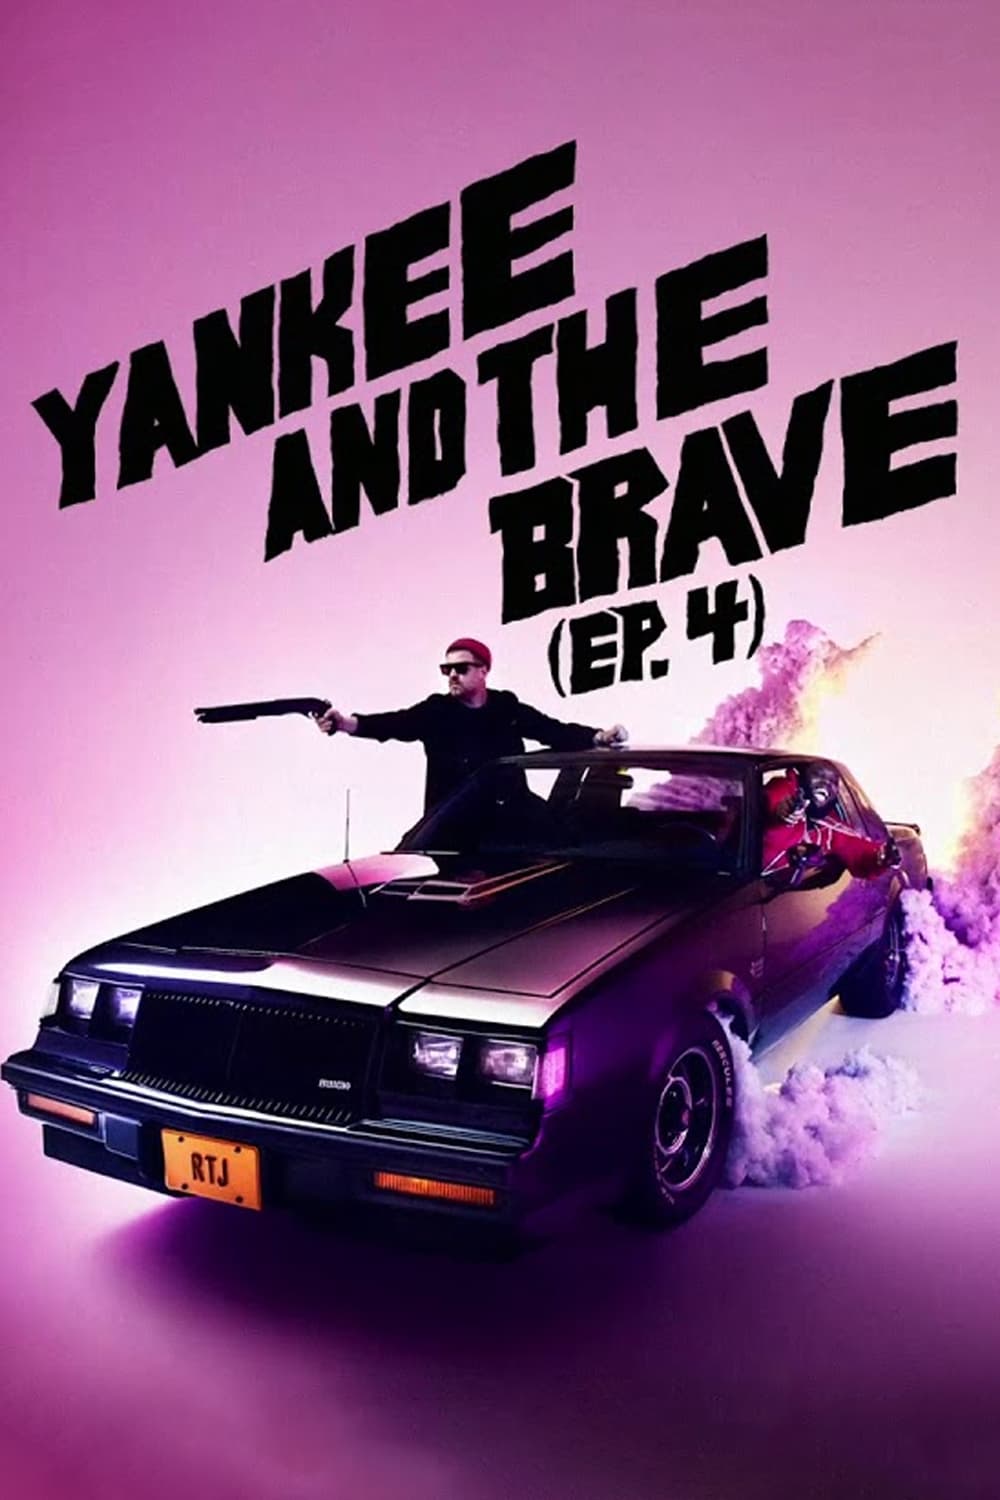 Run The Jewels "Yankee and the Brave (ep. 4)"